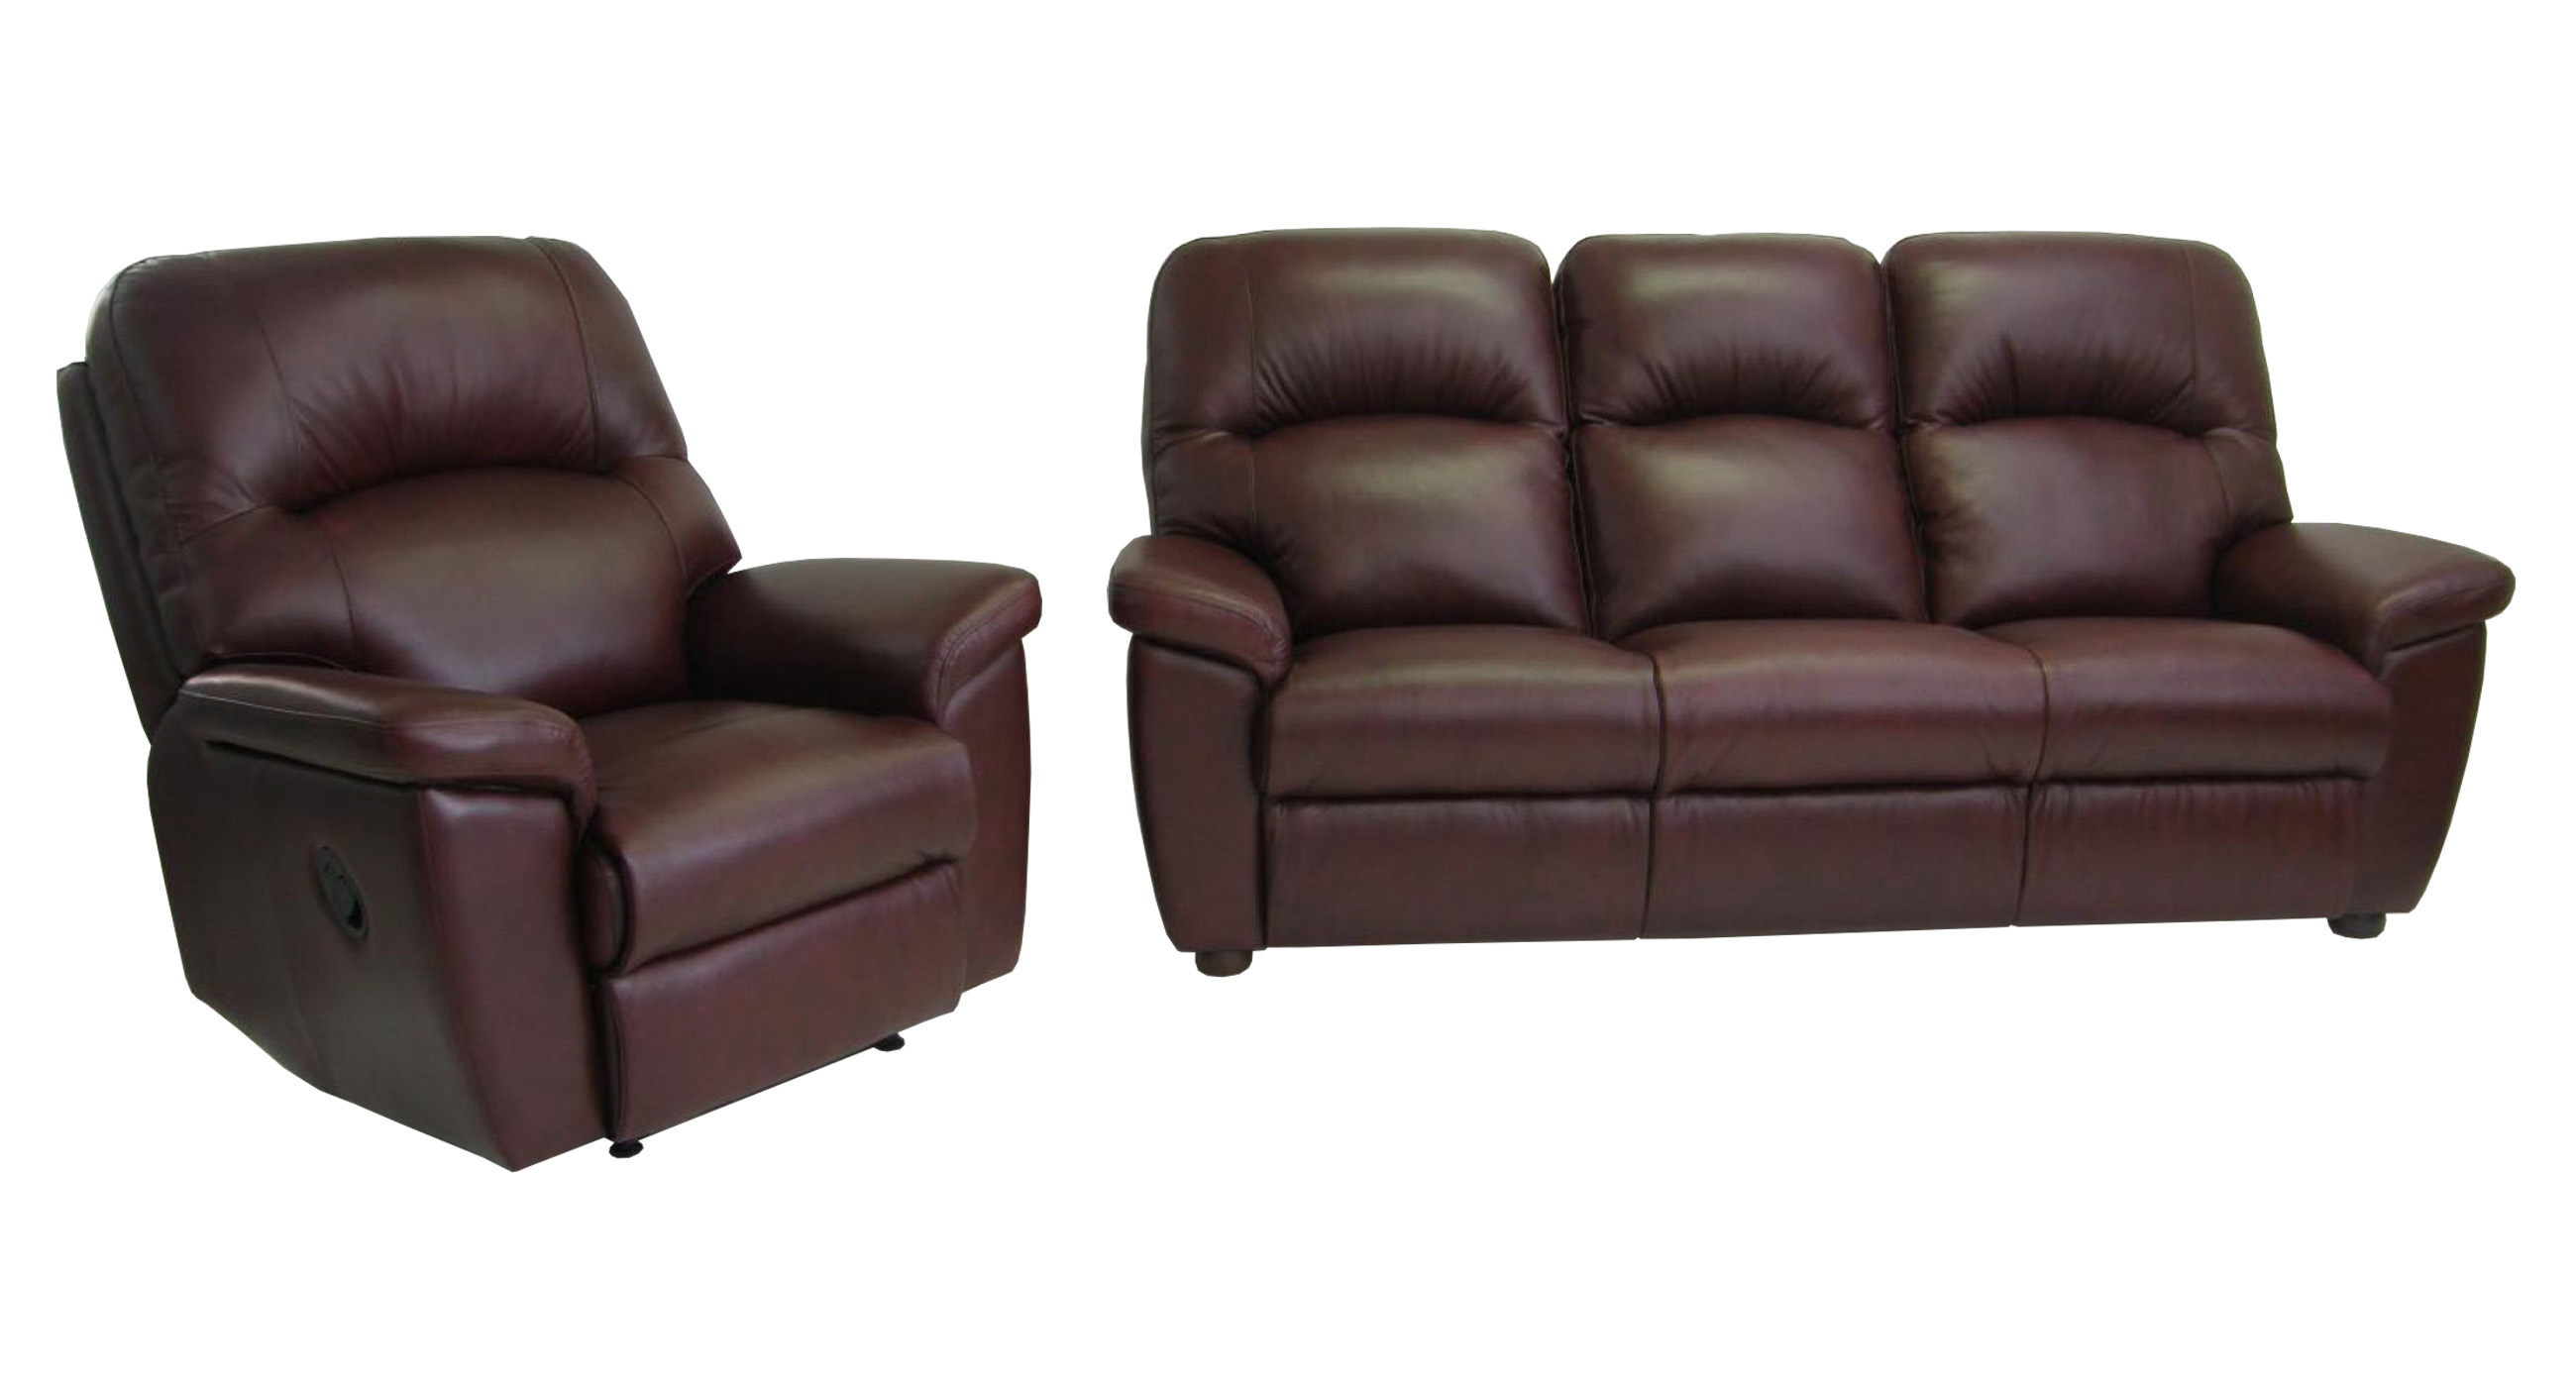 Hastings Reclining Sofa and Chairs